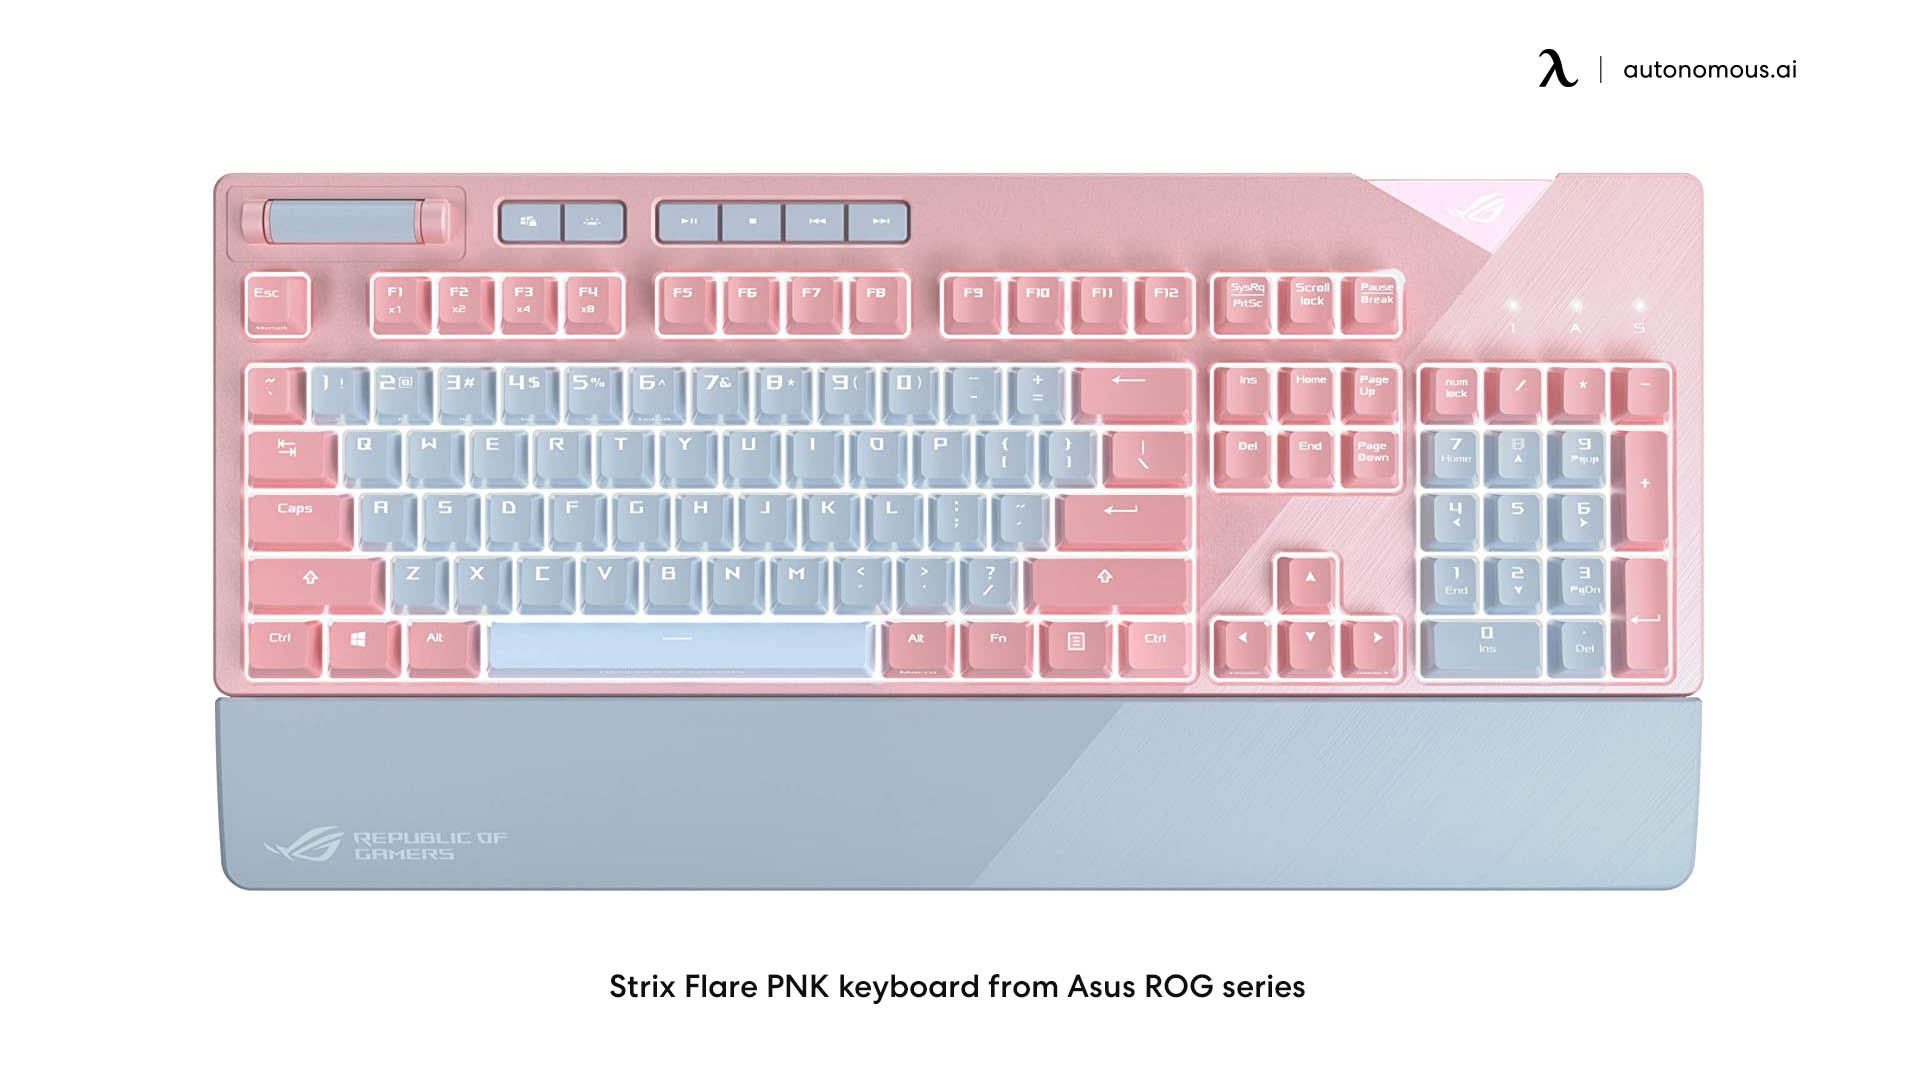 Strix Flare PNK keyboard from Asus ROG series